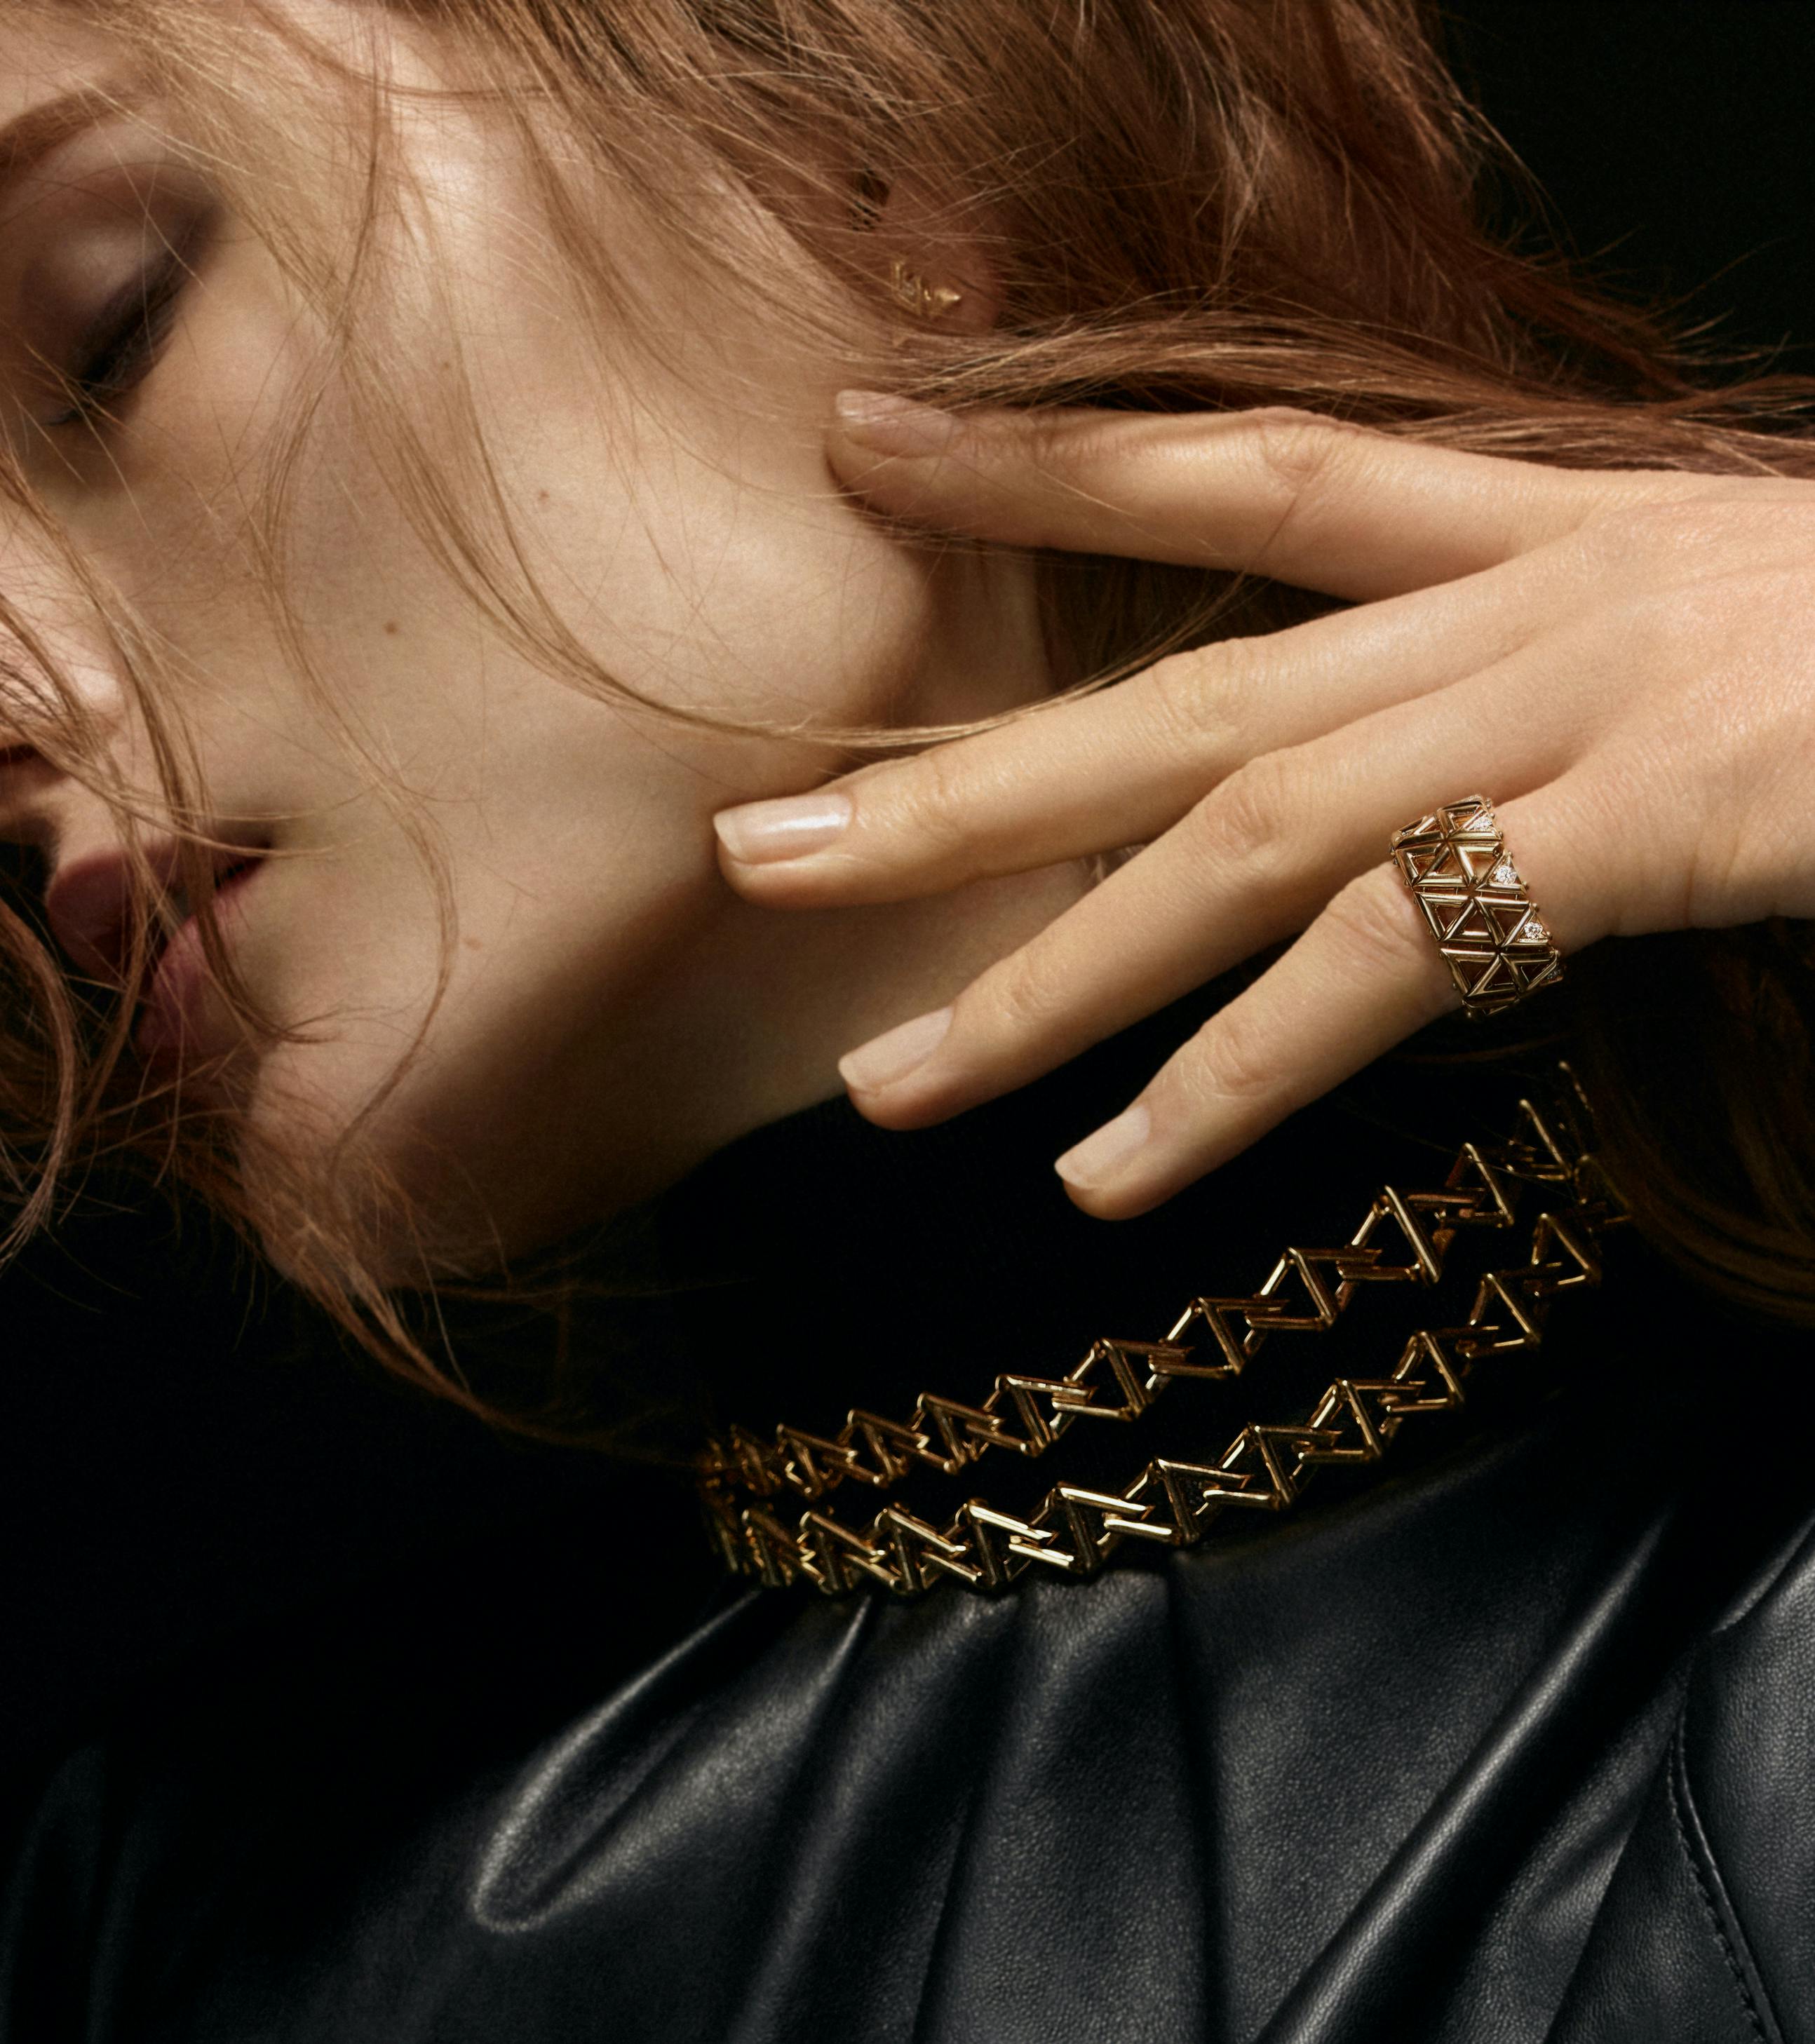 Louis Vuitton Fine Jewellery Electrifies with 'LV Volt' Collection